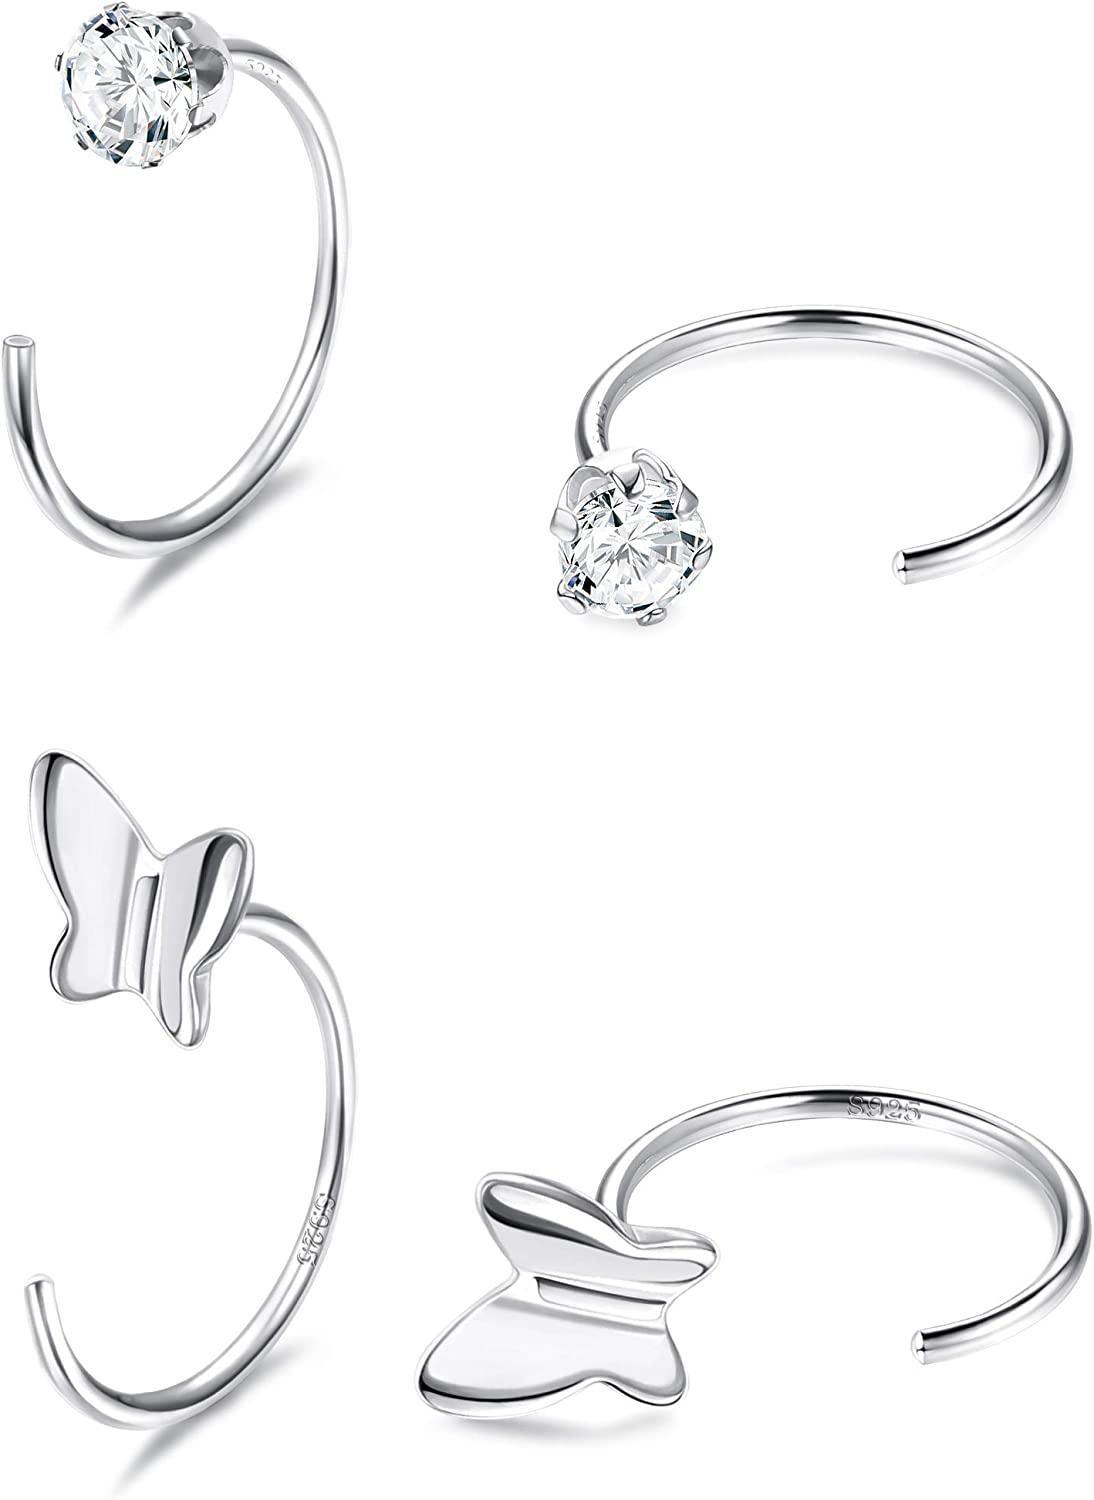 Six 4Pcs Sterling Silver Ball Nose Rings displayed against a white background, including designs with a cubic zirconia, a ball, and butterfly shapes.